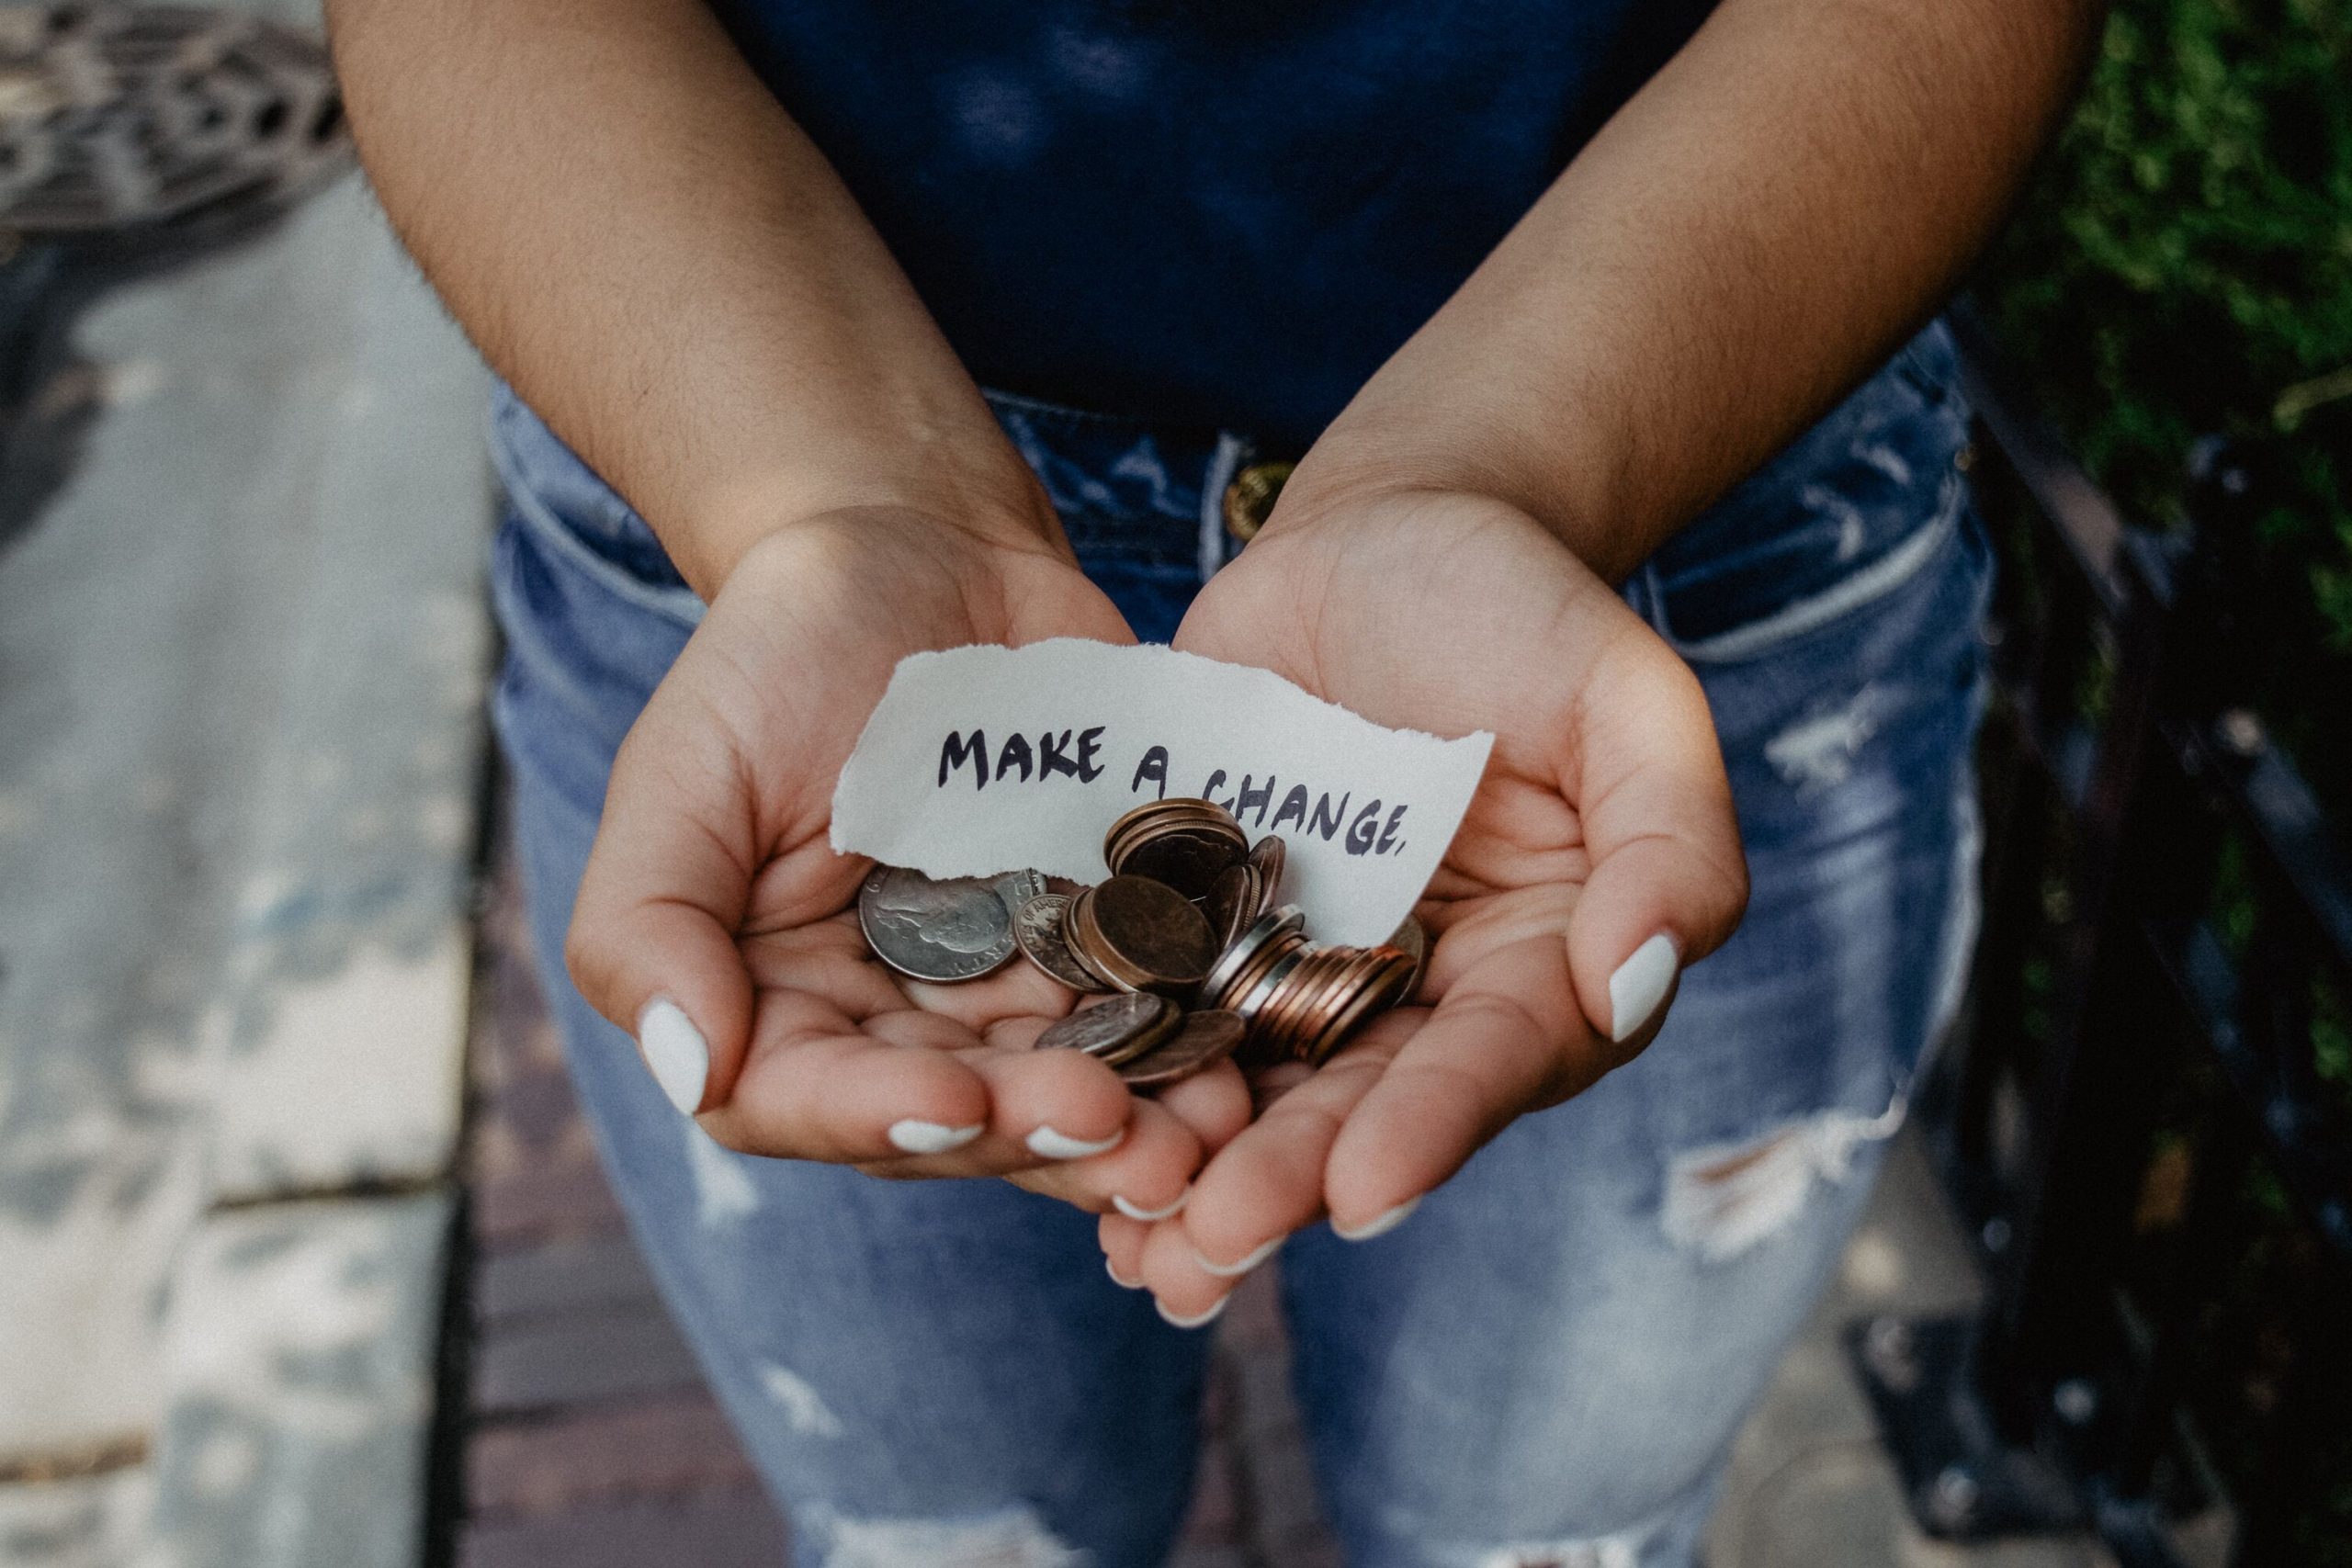 A photograph of a person holding out their hands filled with coins and a message that reads "Make a change"